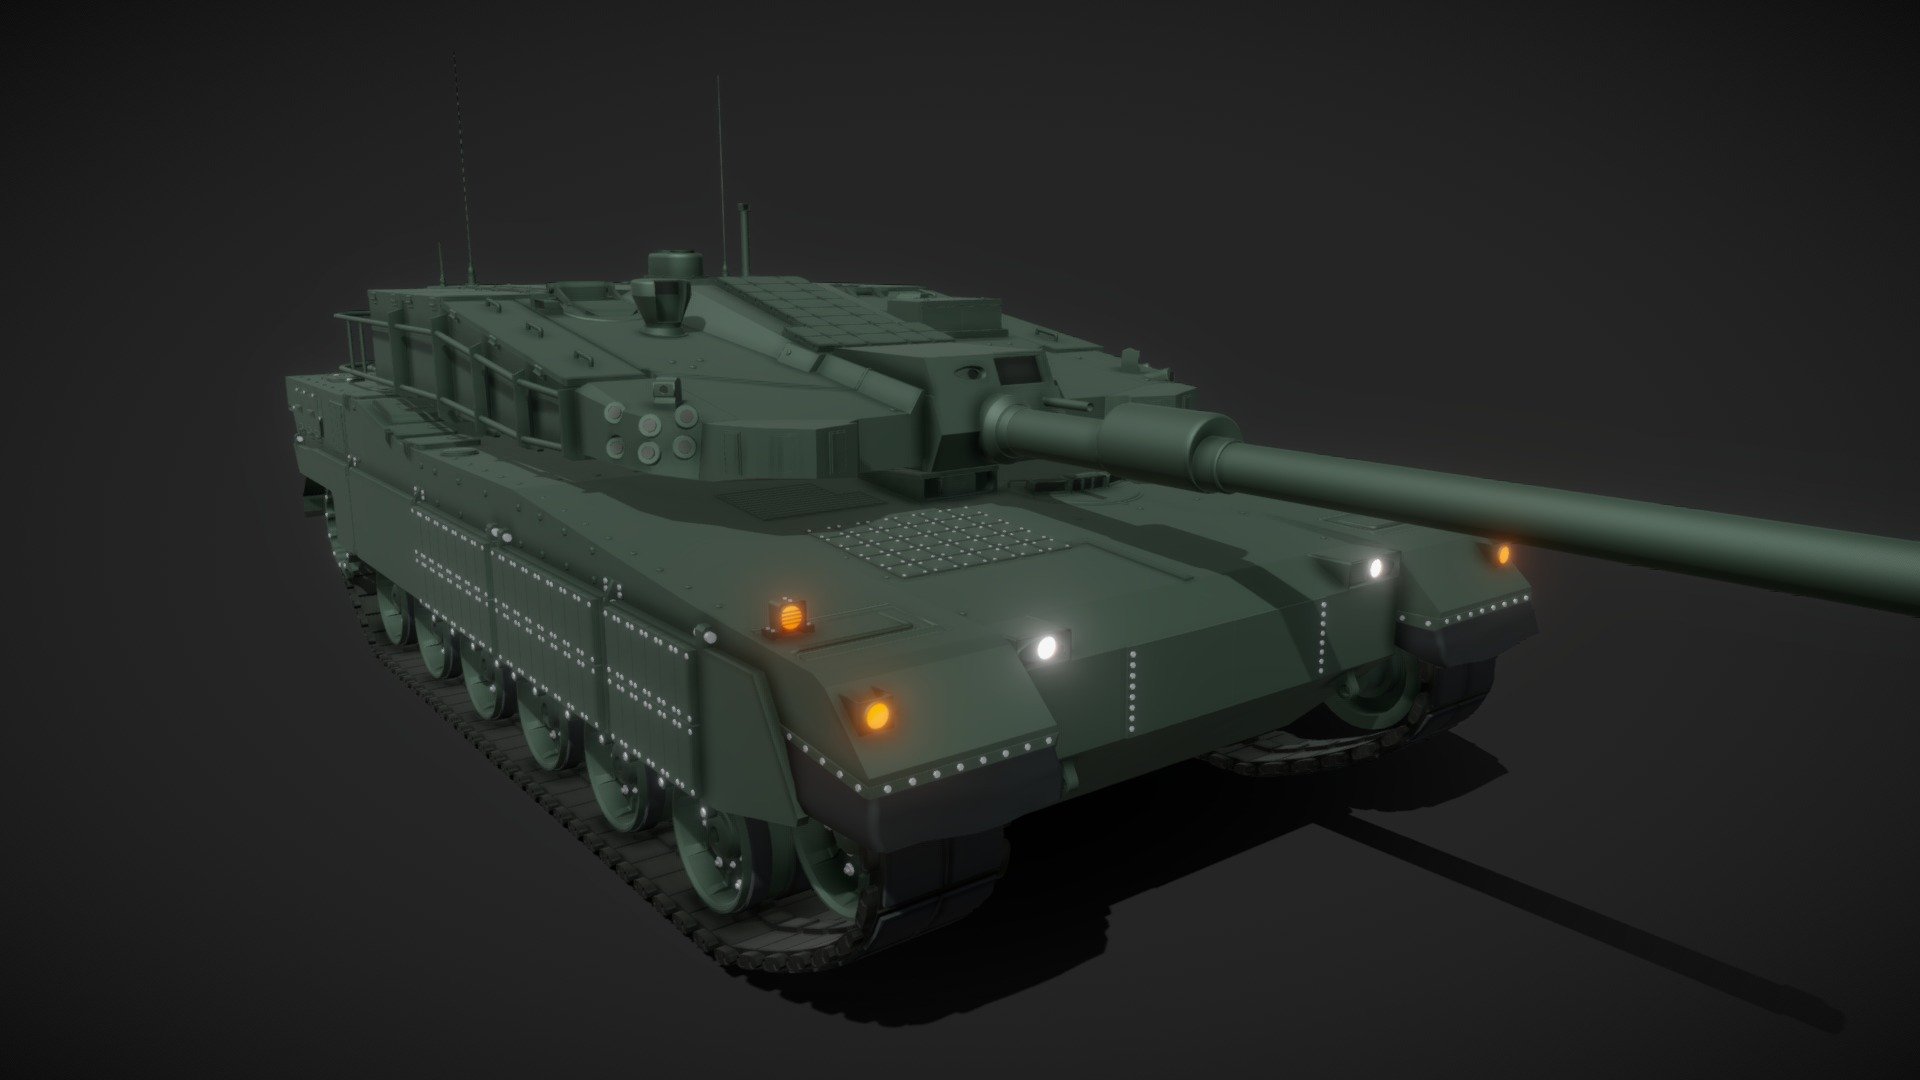 Made this K2 Black panther MBT to get back in to modelling. I mostly tried to make it by eyeballing it for practice.
Also tried to practice better topology by having no Ngons/better edge flow etc. 

The K2 Black Panther (Hangul: K2 &lsquo;흑표'; Hanja: K2 &lsquo;黑豹') is a South Korean main battle tank designed by the Agency for Defense Development and manufactured by Hyundai Rotem. The tank was designed to meet the strategic requirements of the Republic of Korea Army's reform for three-dimensional, high-speed maneuver warfare based on use of network-centric warfare that began in the 1990s.

(The tank isnt completly 100% accurate to the real life version) - K2 Black panther Main BattleTank - 3D model by Dylan Spin (@DylanSpin) 3d model